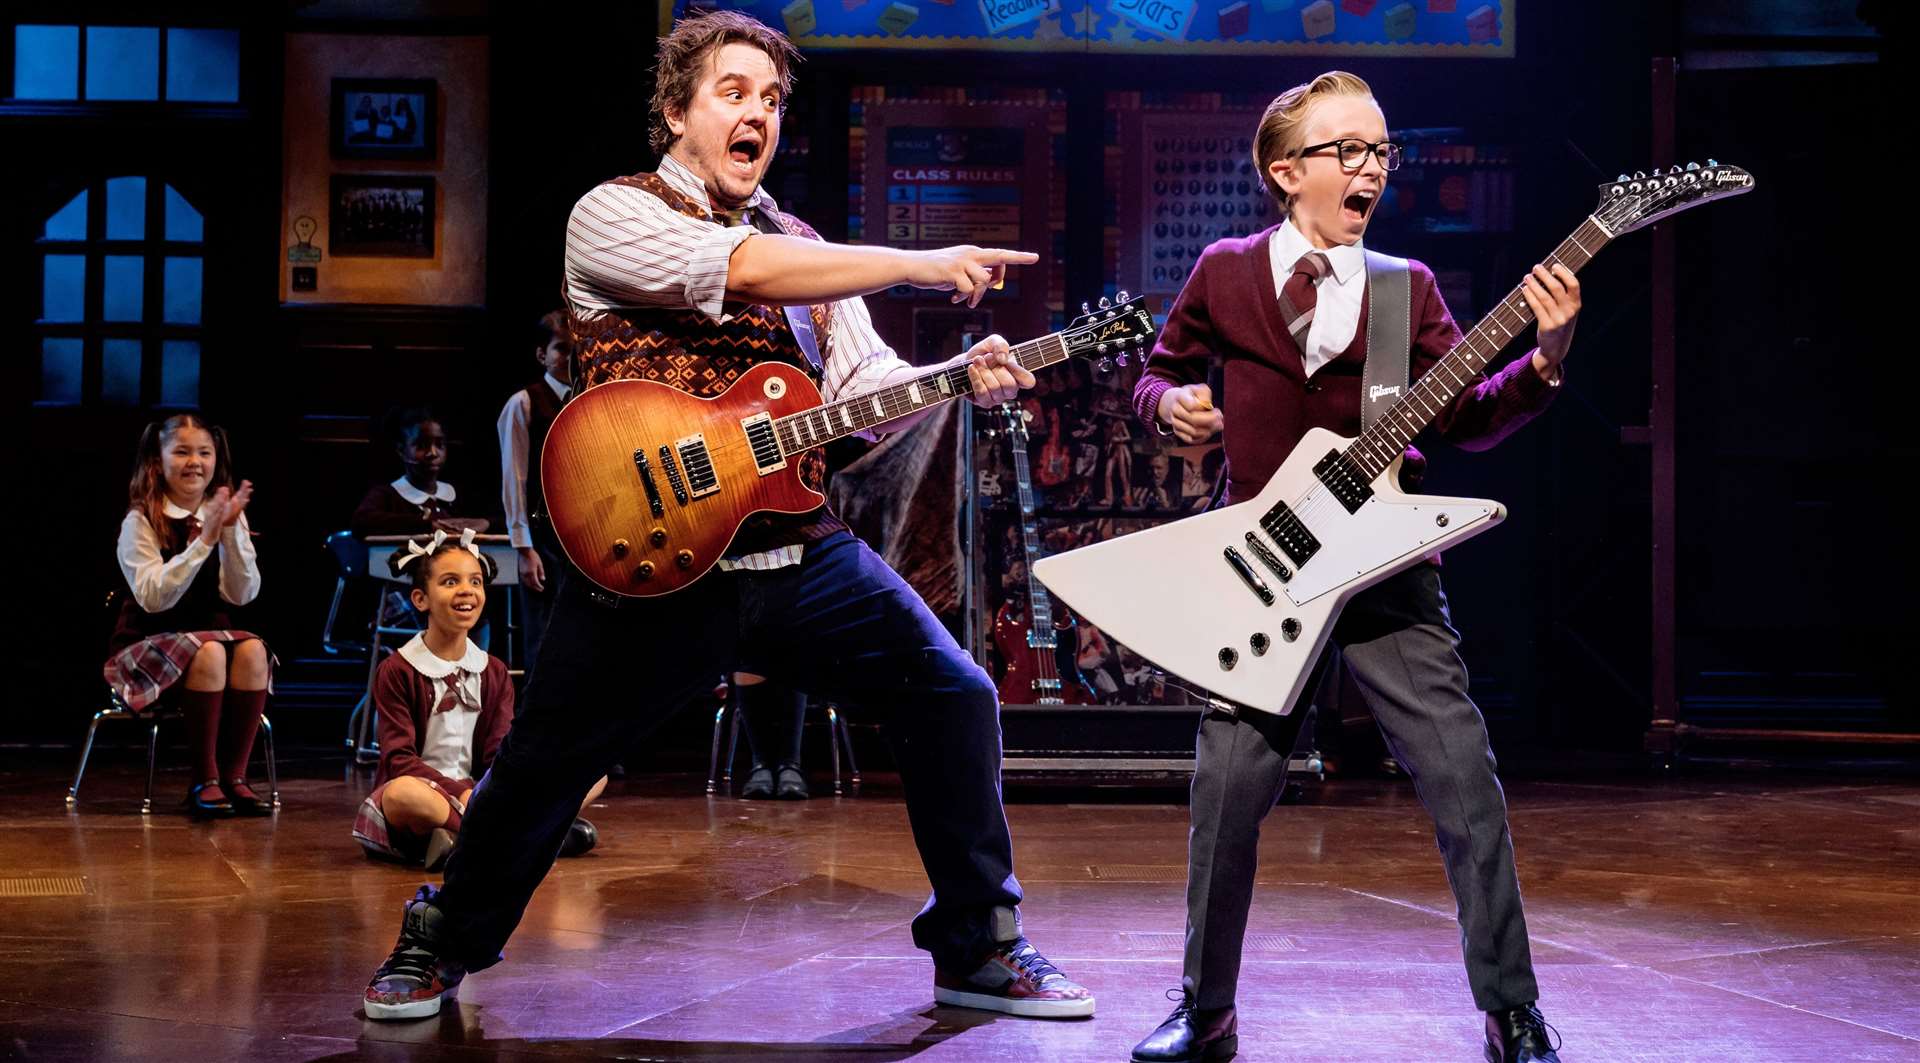 Rock on! Andrew Lloyd Webber’s award-winning musical School Of Rock is not to be missed.